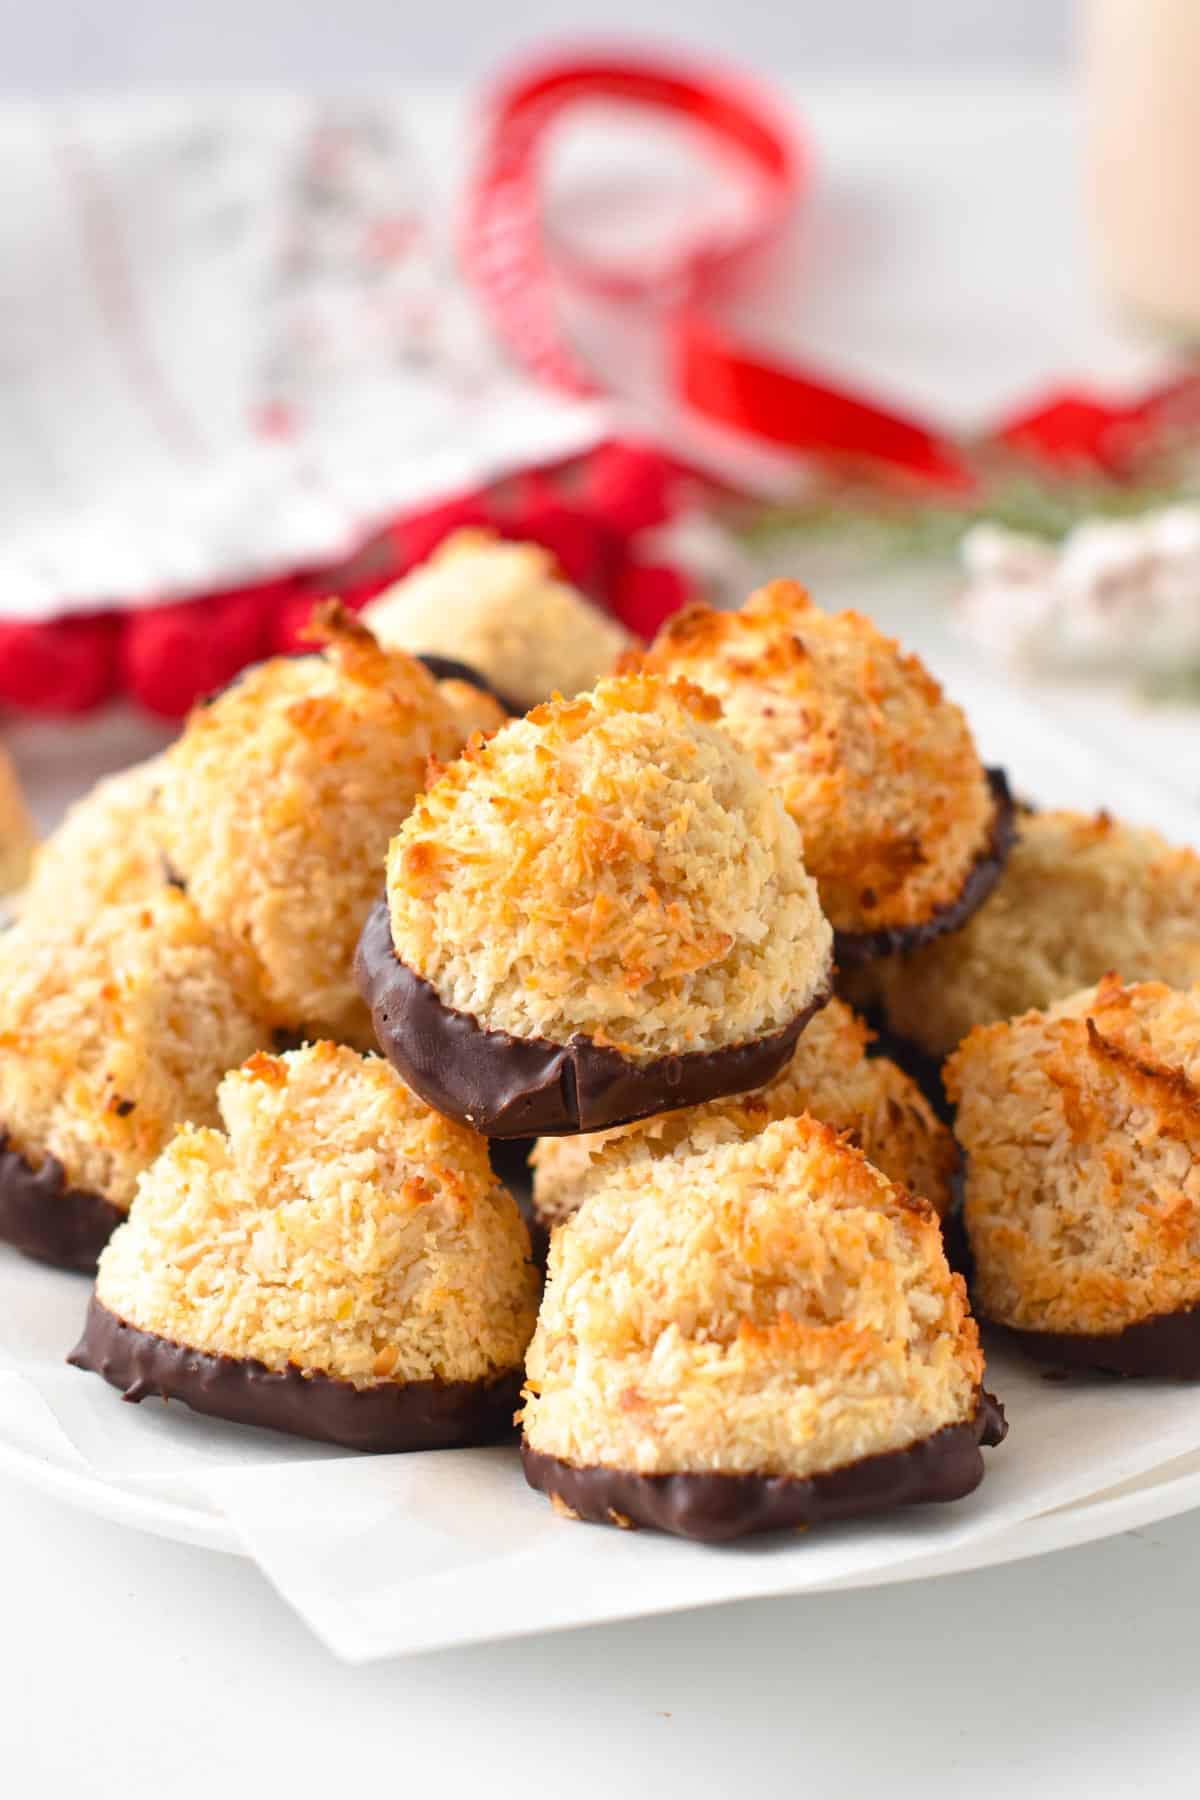 A plate filled with a stack of vegan coconut macaroons with toasted coconut and chocolate dipped.